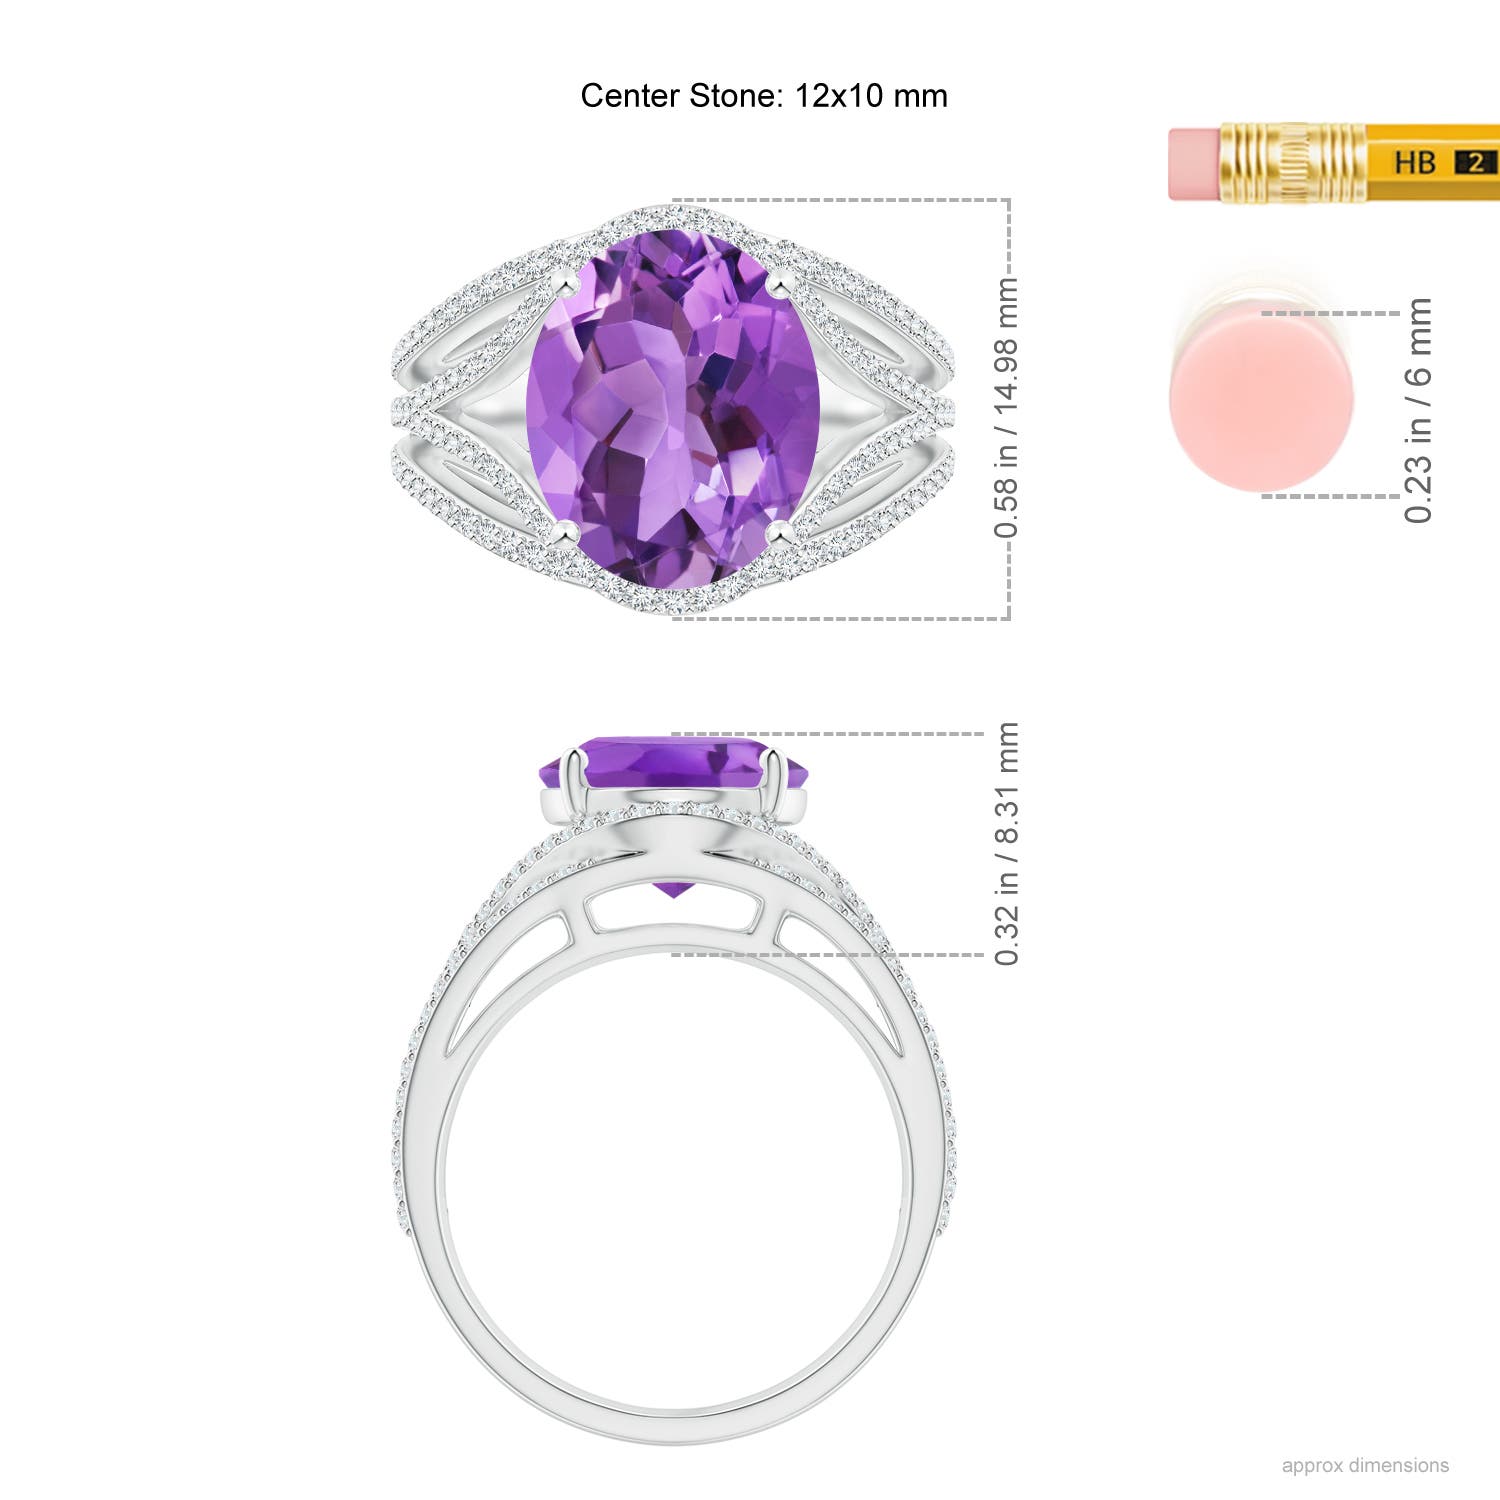 AA - Amethyst / 4.94 CT / 14 KT White Gold